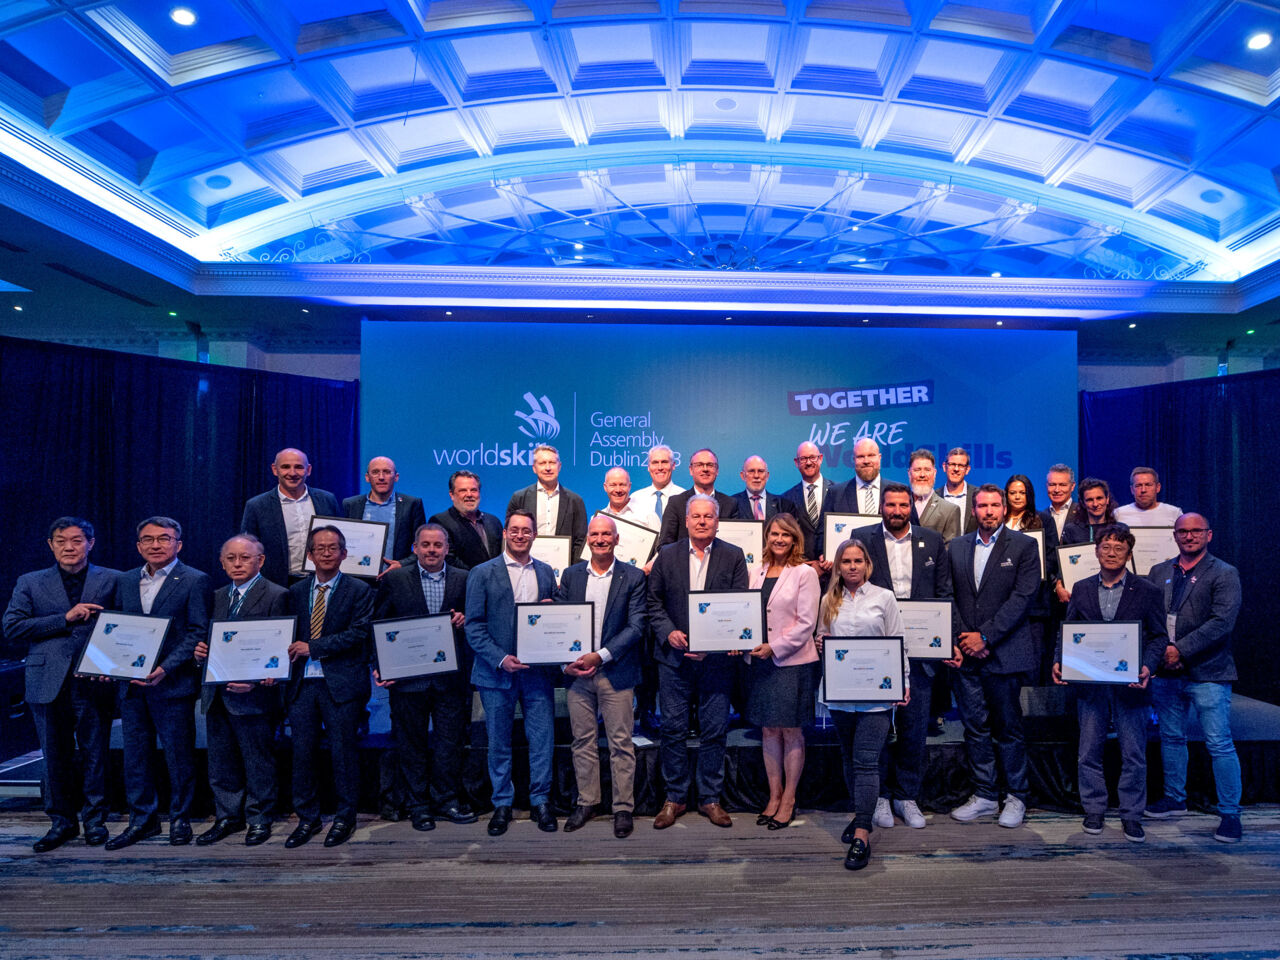 WorldSkills Competition 2022 Special Edition Hosts and Presenting Partner Samsung on stage with certificates recognizing their outstanding contributions to the hosting of the event.